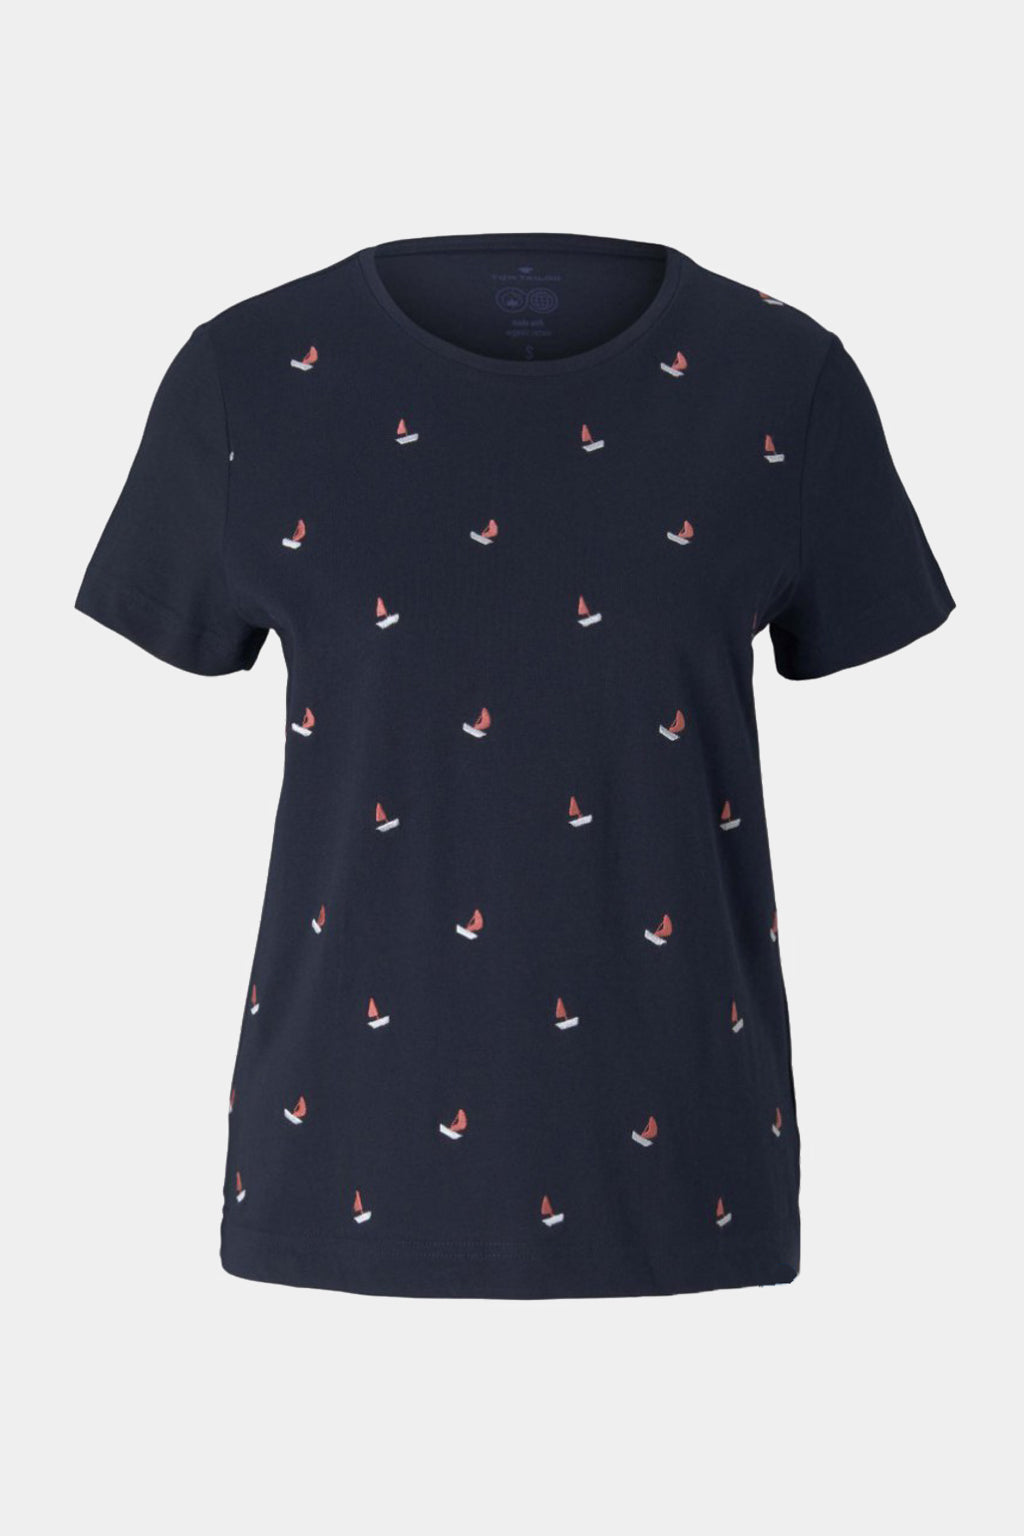 Tom Tailor - Embroidered T-Shirt, Organic Cotton